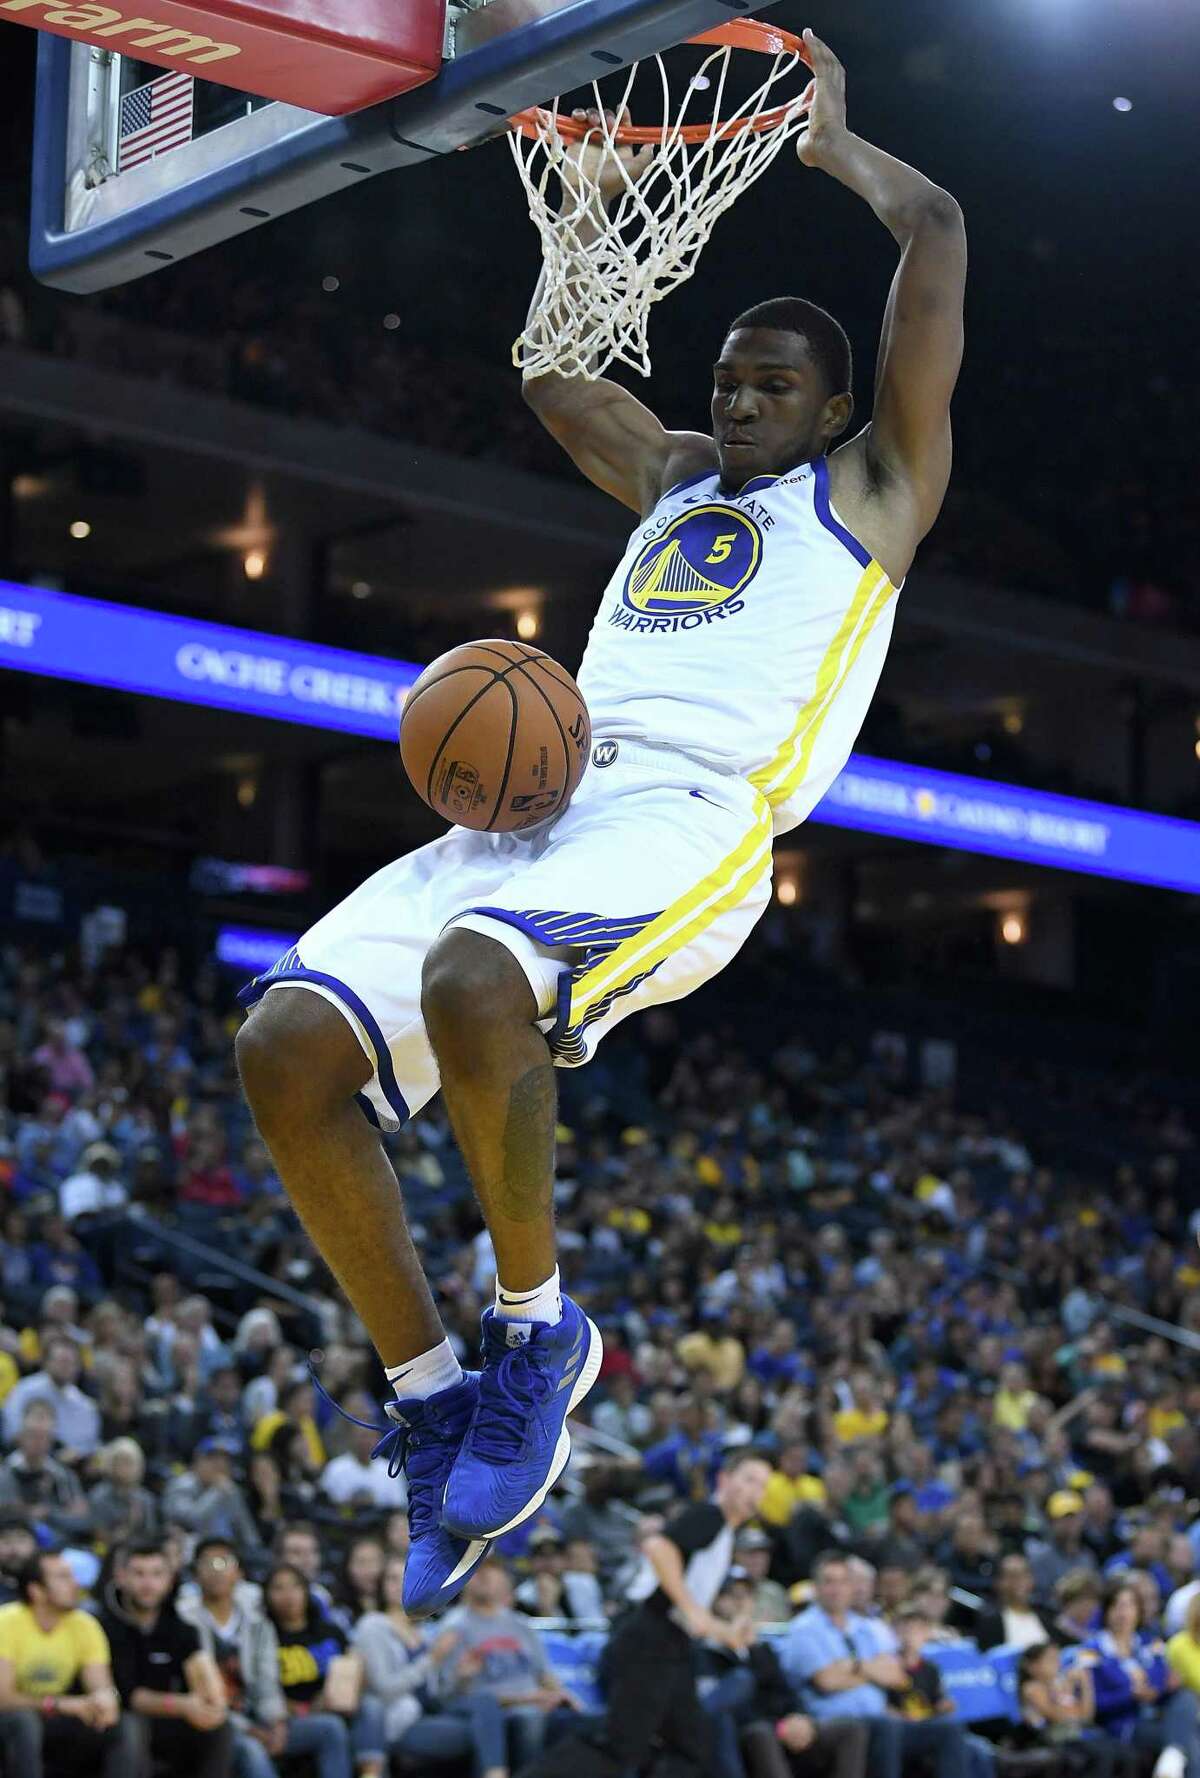 Golden State Warriors center-forward Kevon Looney worked out at a jiujitsu studio as part of his offseason regimen. The training has helped put him into a key backup role on the team. OAKLAND, CA - SEPTEMBER 29: Kevon Looney #5 of the Golden State Warriors goes up for a slam dunk against the Minnesota Timberwolves during an NBA basketball game at ORACLE Arena on September 29, 2018 in Oakland, California. NOTE TO USER: User expressly acknowledges and agrees that, by downloading and or using this photograph, User is consenting to the terms and conditions of the Getty Images License Agreement. (Photo by Thearon W. Henderson/Getty Images)